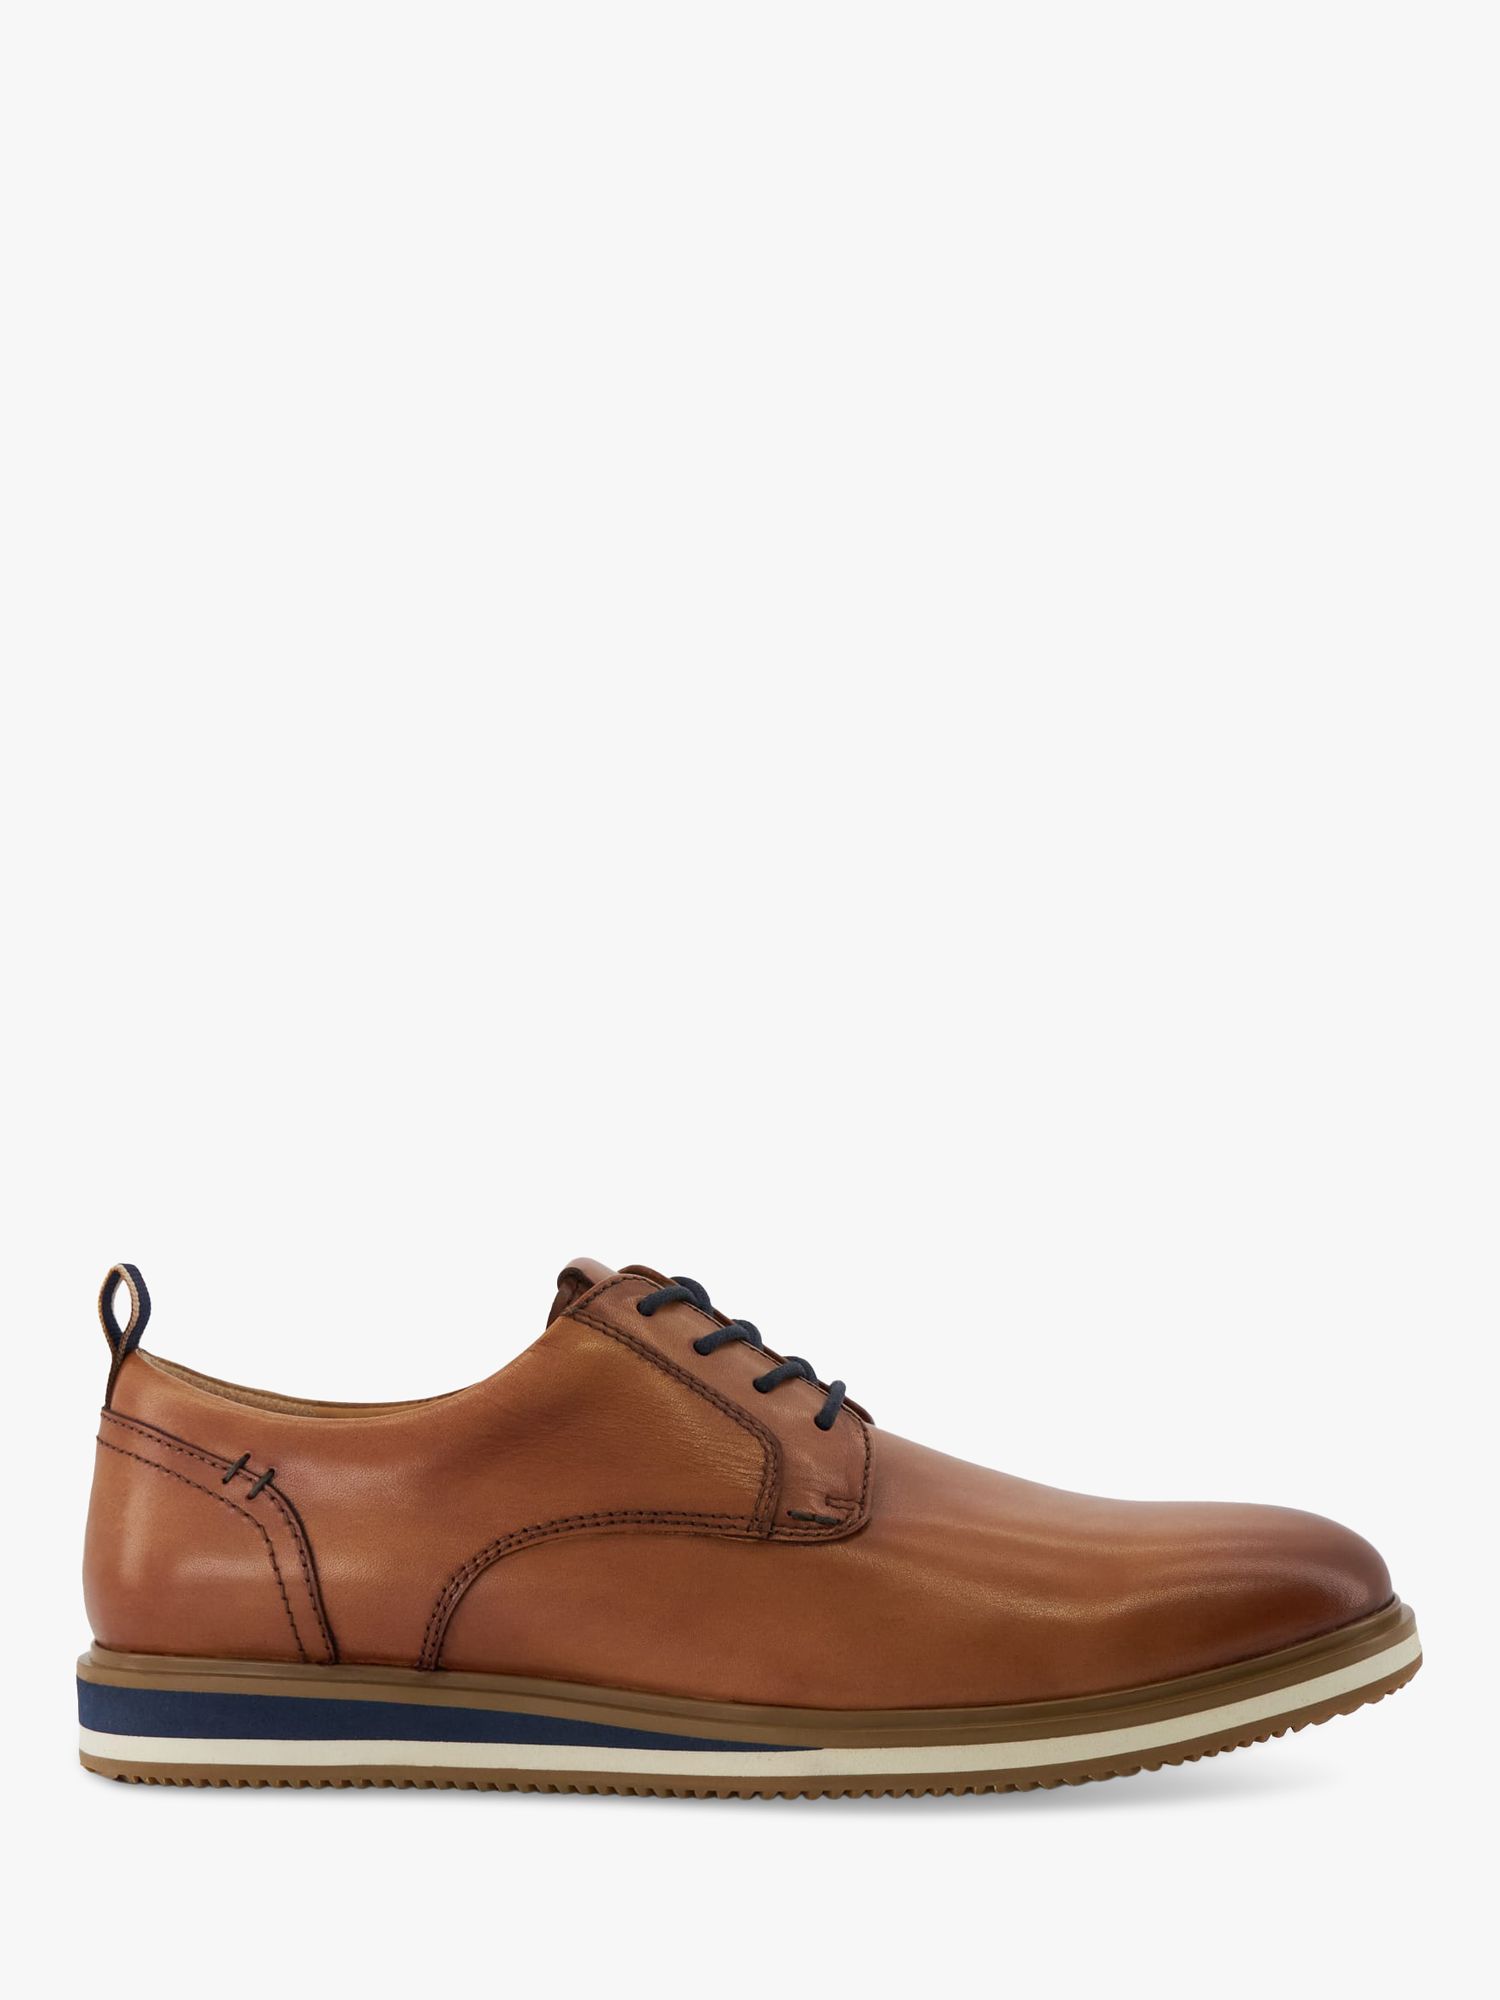 Dune Blaksley Leather Lace-Up Shoes, Tan at John Lewis & Partners